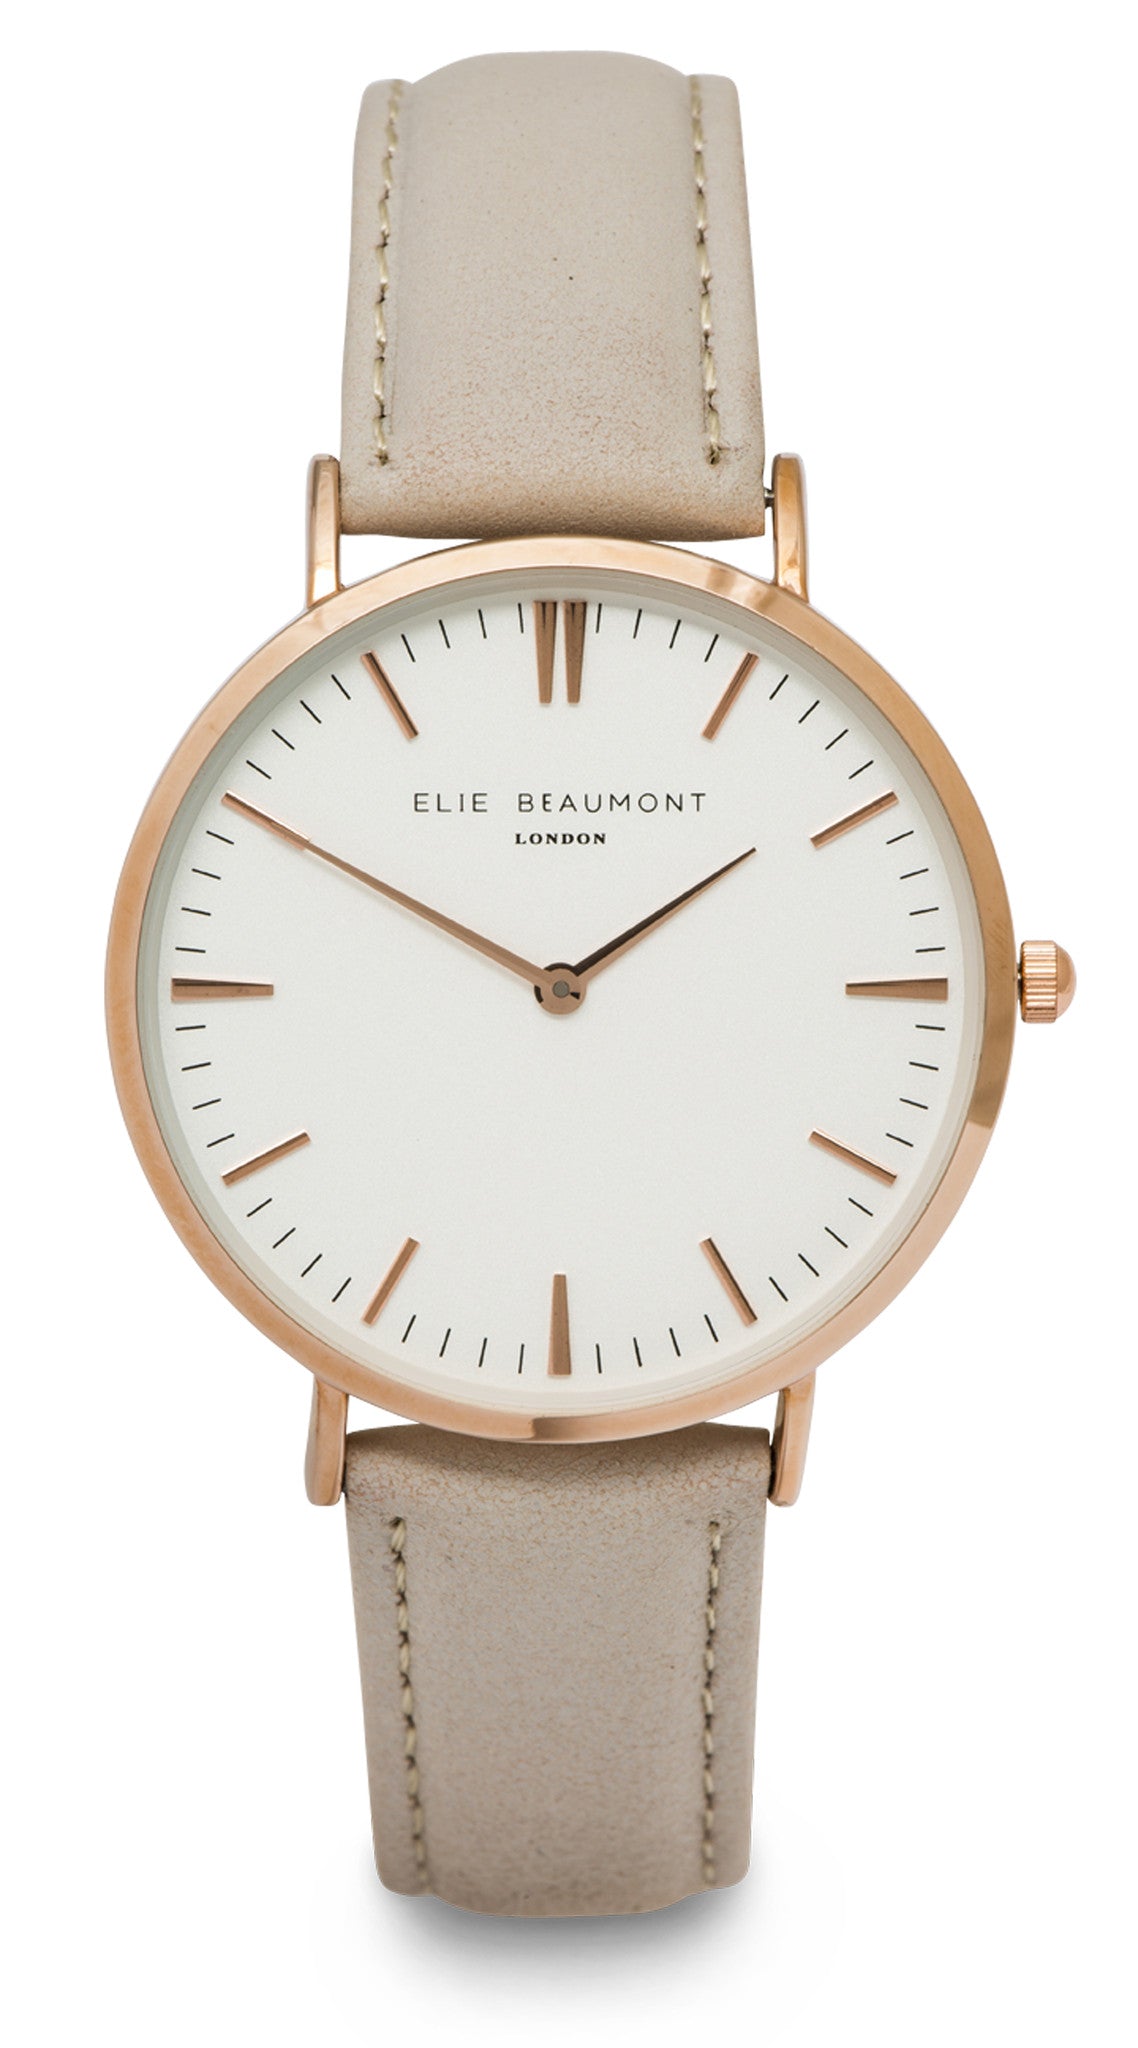 Elie Beaumont Oxford Small Ladies Watch - Stone Nappa Leather - Stevens Jewellers Letterkenny Donegal